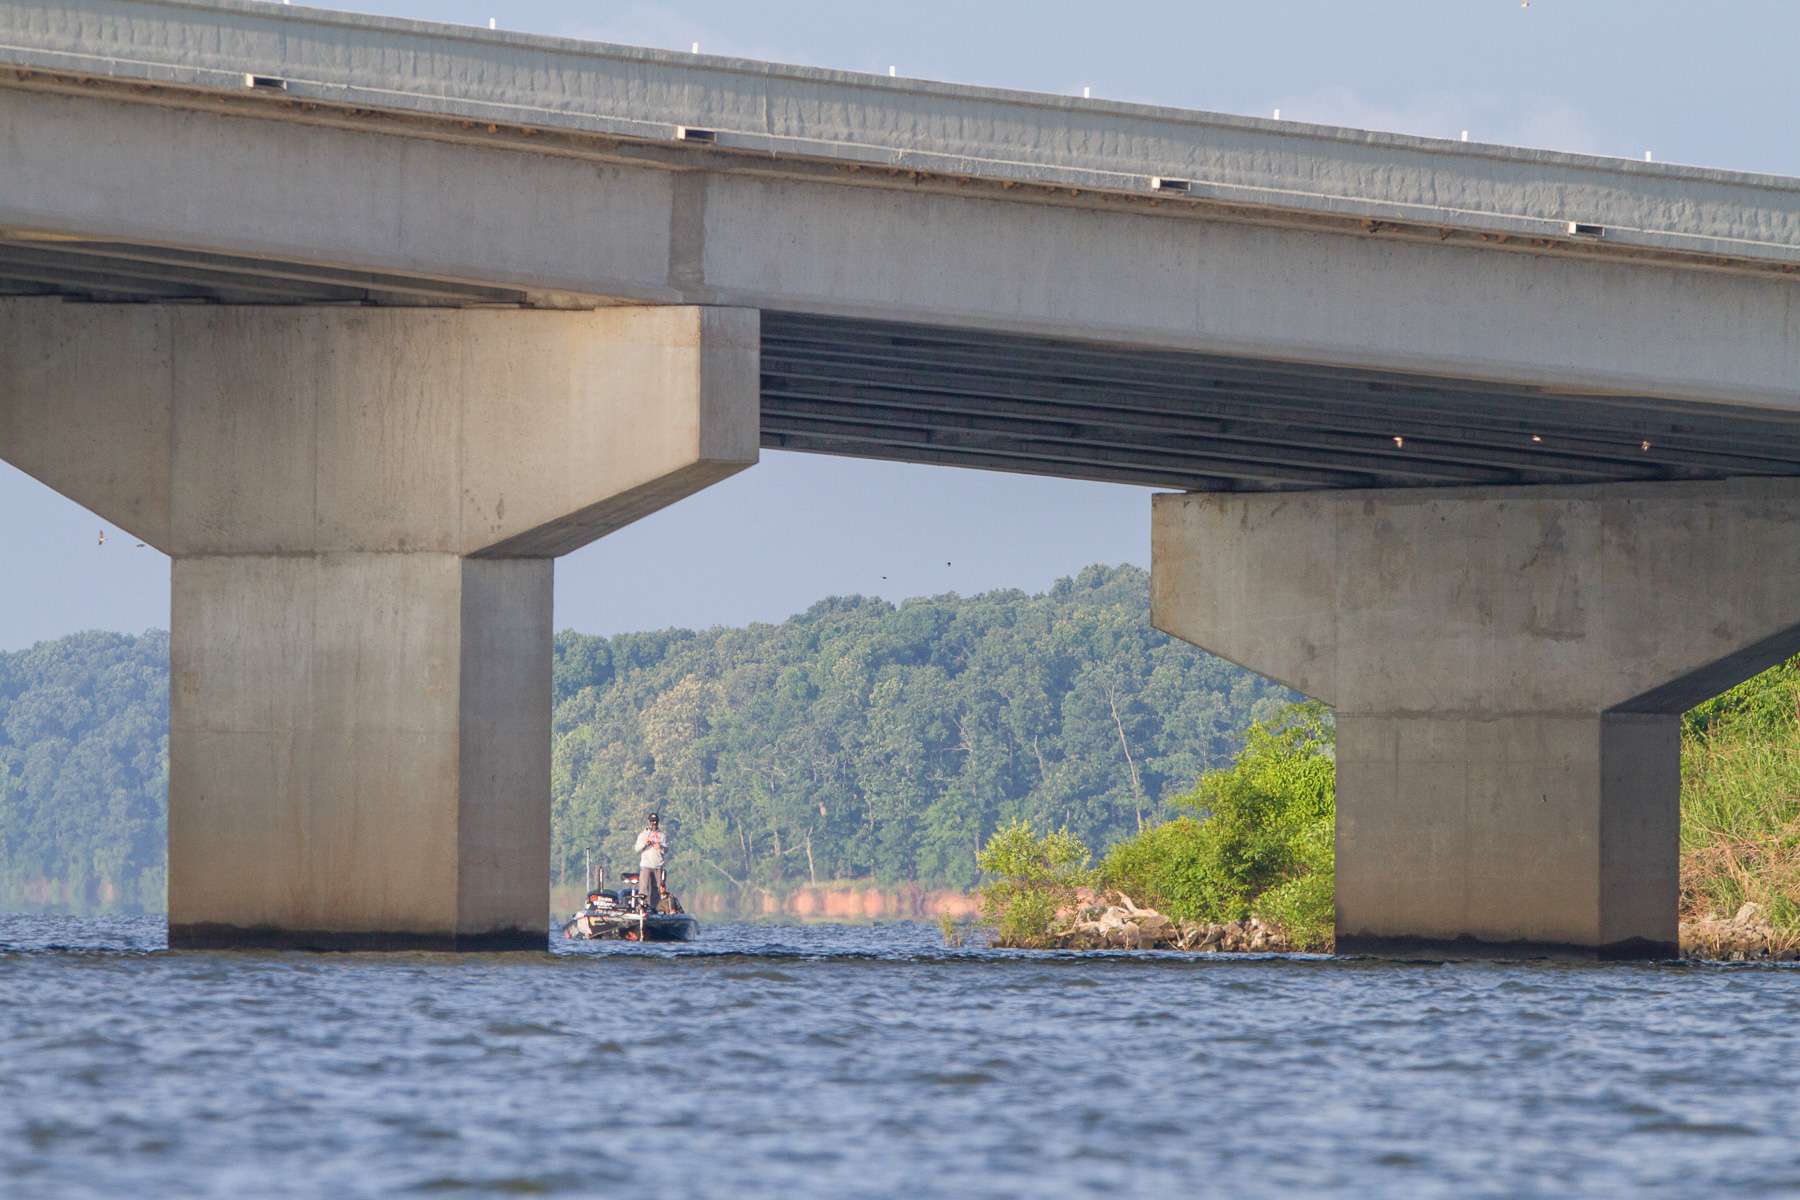 <h4>20. Kentucky Lake, Kentucky/Tennessee </h4>
 [160,309 acres] This massive lake continues to produce quality bass fishing, mainly for largemouth. Tournament data collected on Kentucky Lake by the Kentucky Department of Fish and Wildlife in 2016 reveals the average weight to win an eight-hour tournament was 16.31. The average big fish weighed 6.13. A weight of 51-2 won a major three-day tournament here in April 2016.
